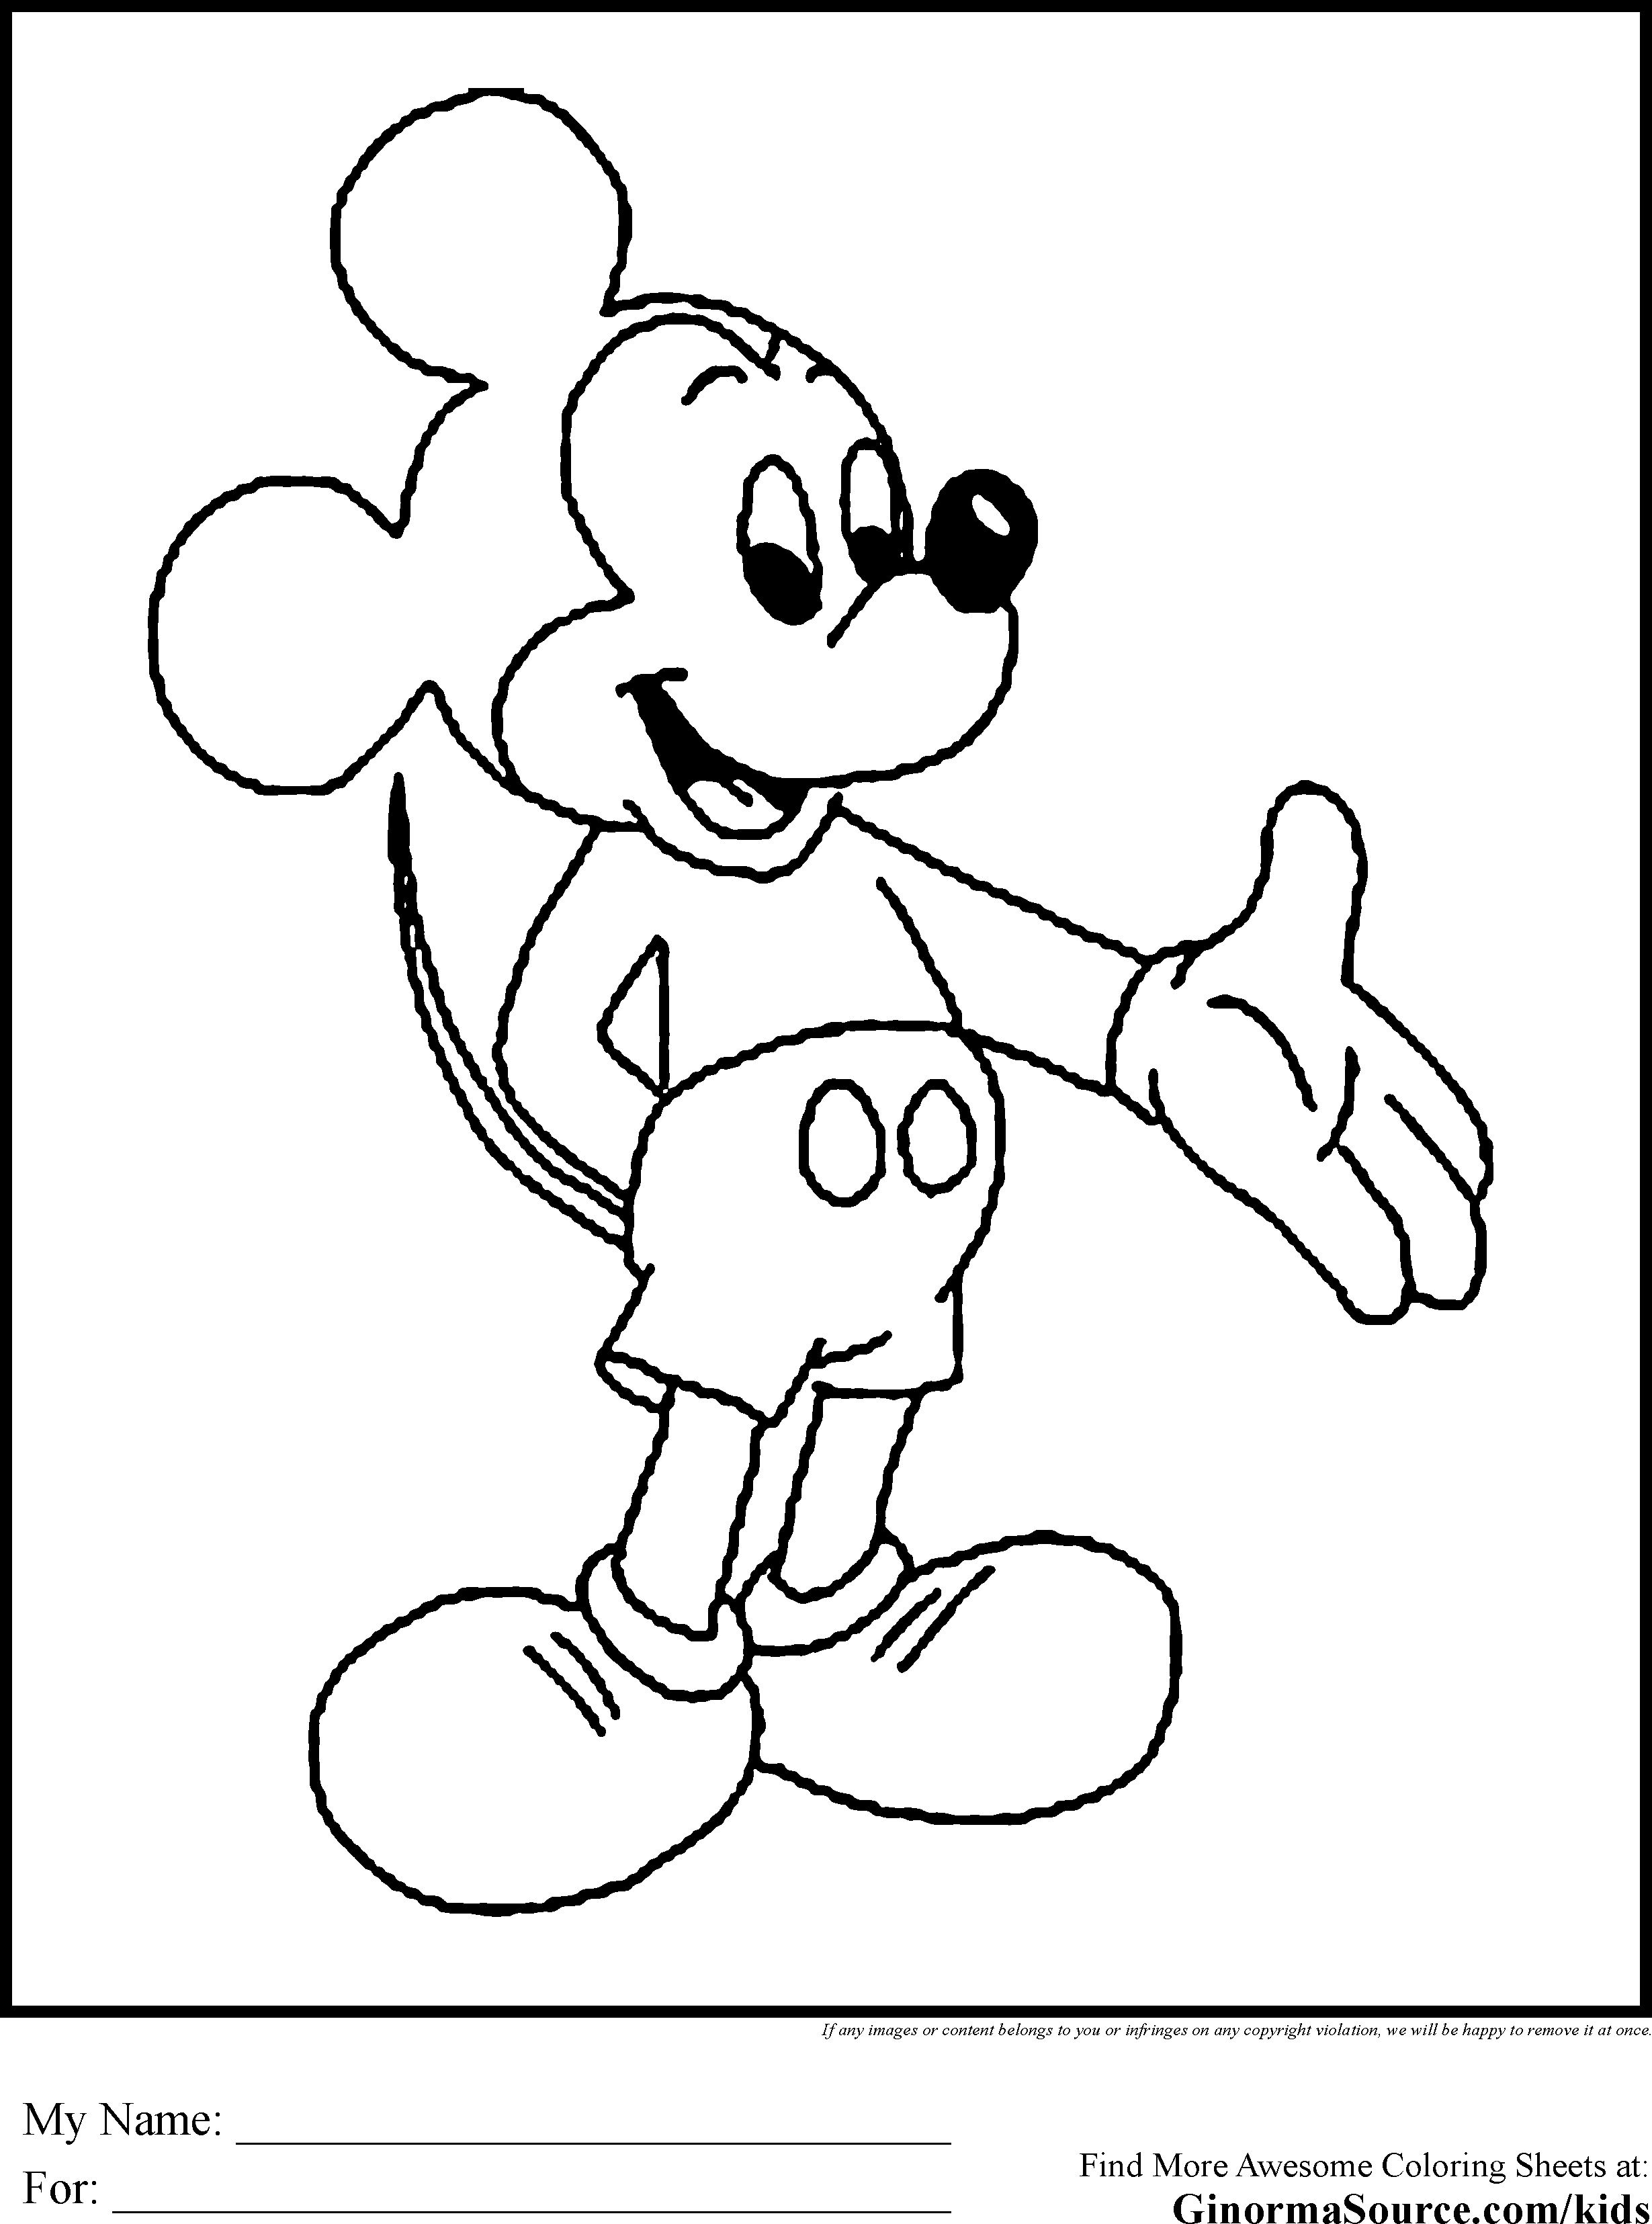 Download Coloring Pages Of Disney Movies - Coloring Home